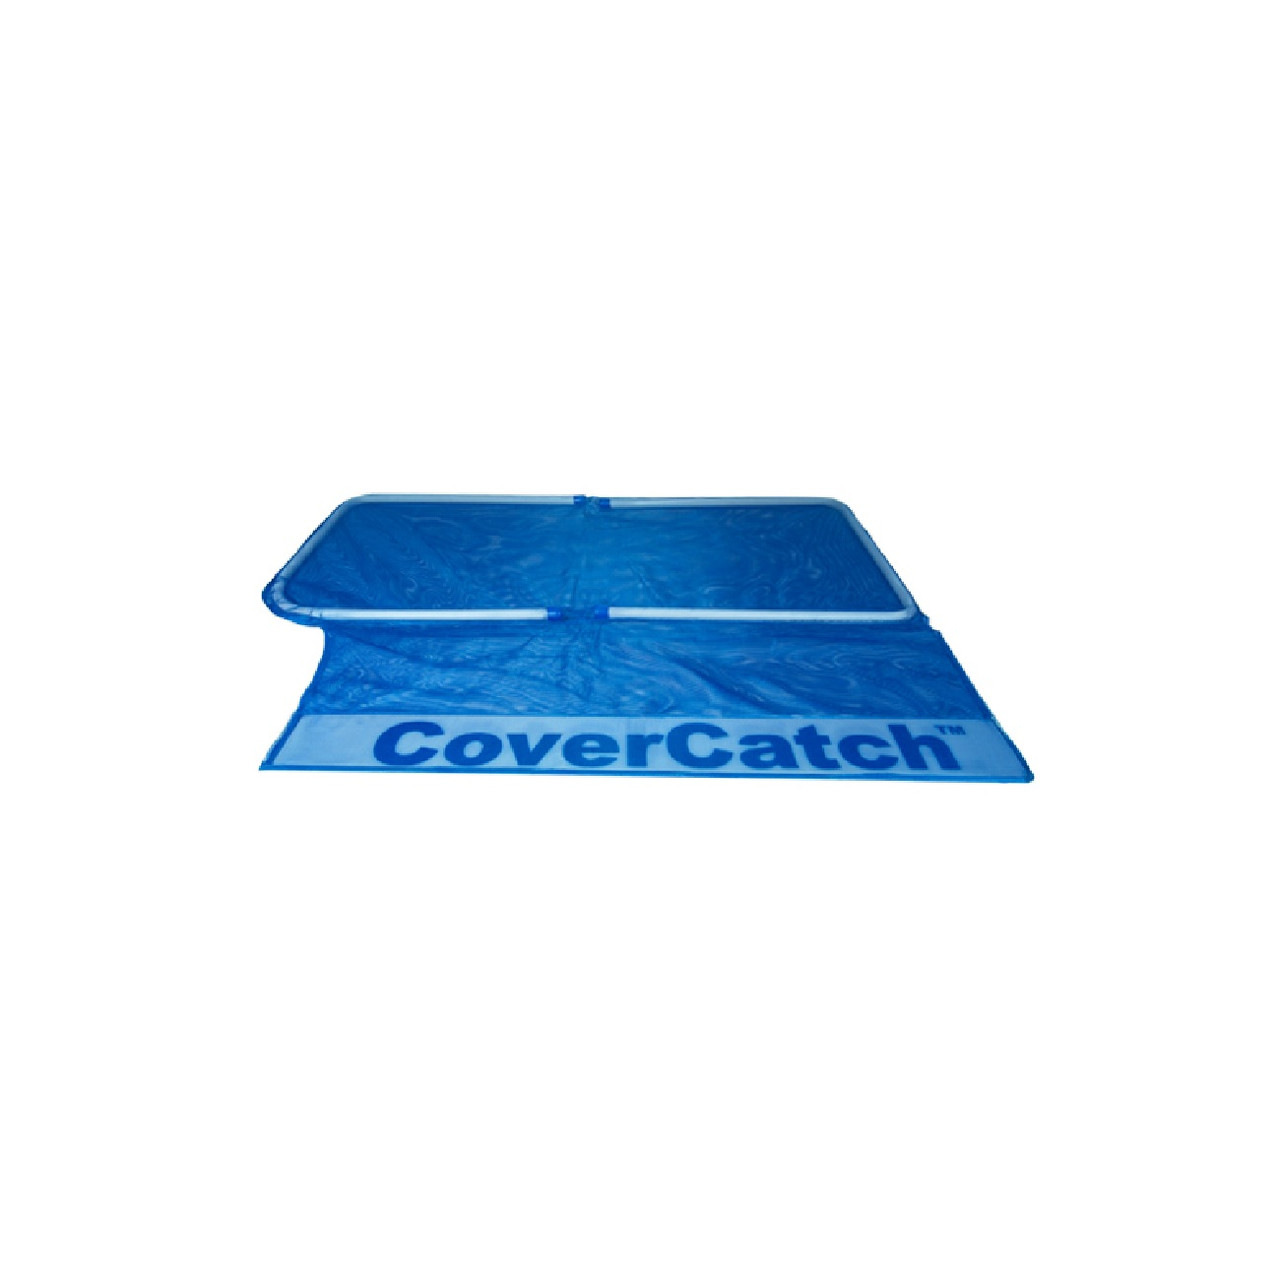 43.75 Blue Cover Catch Swimming Pool Solar Cover Accessory